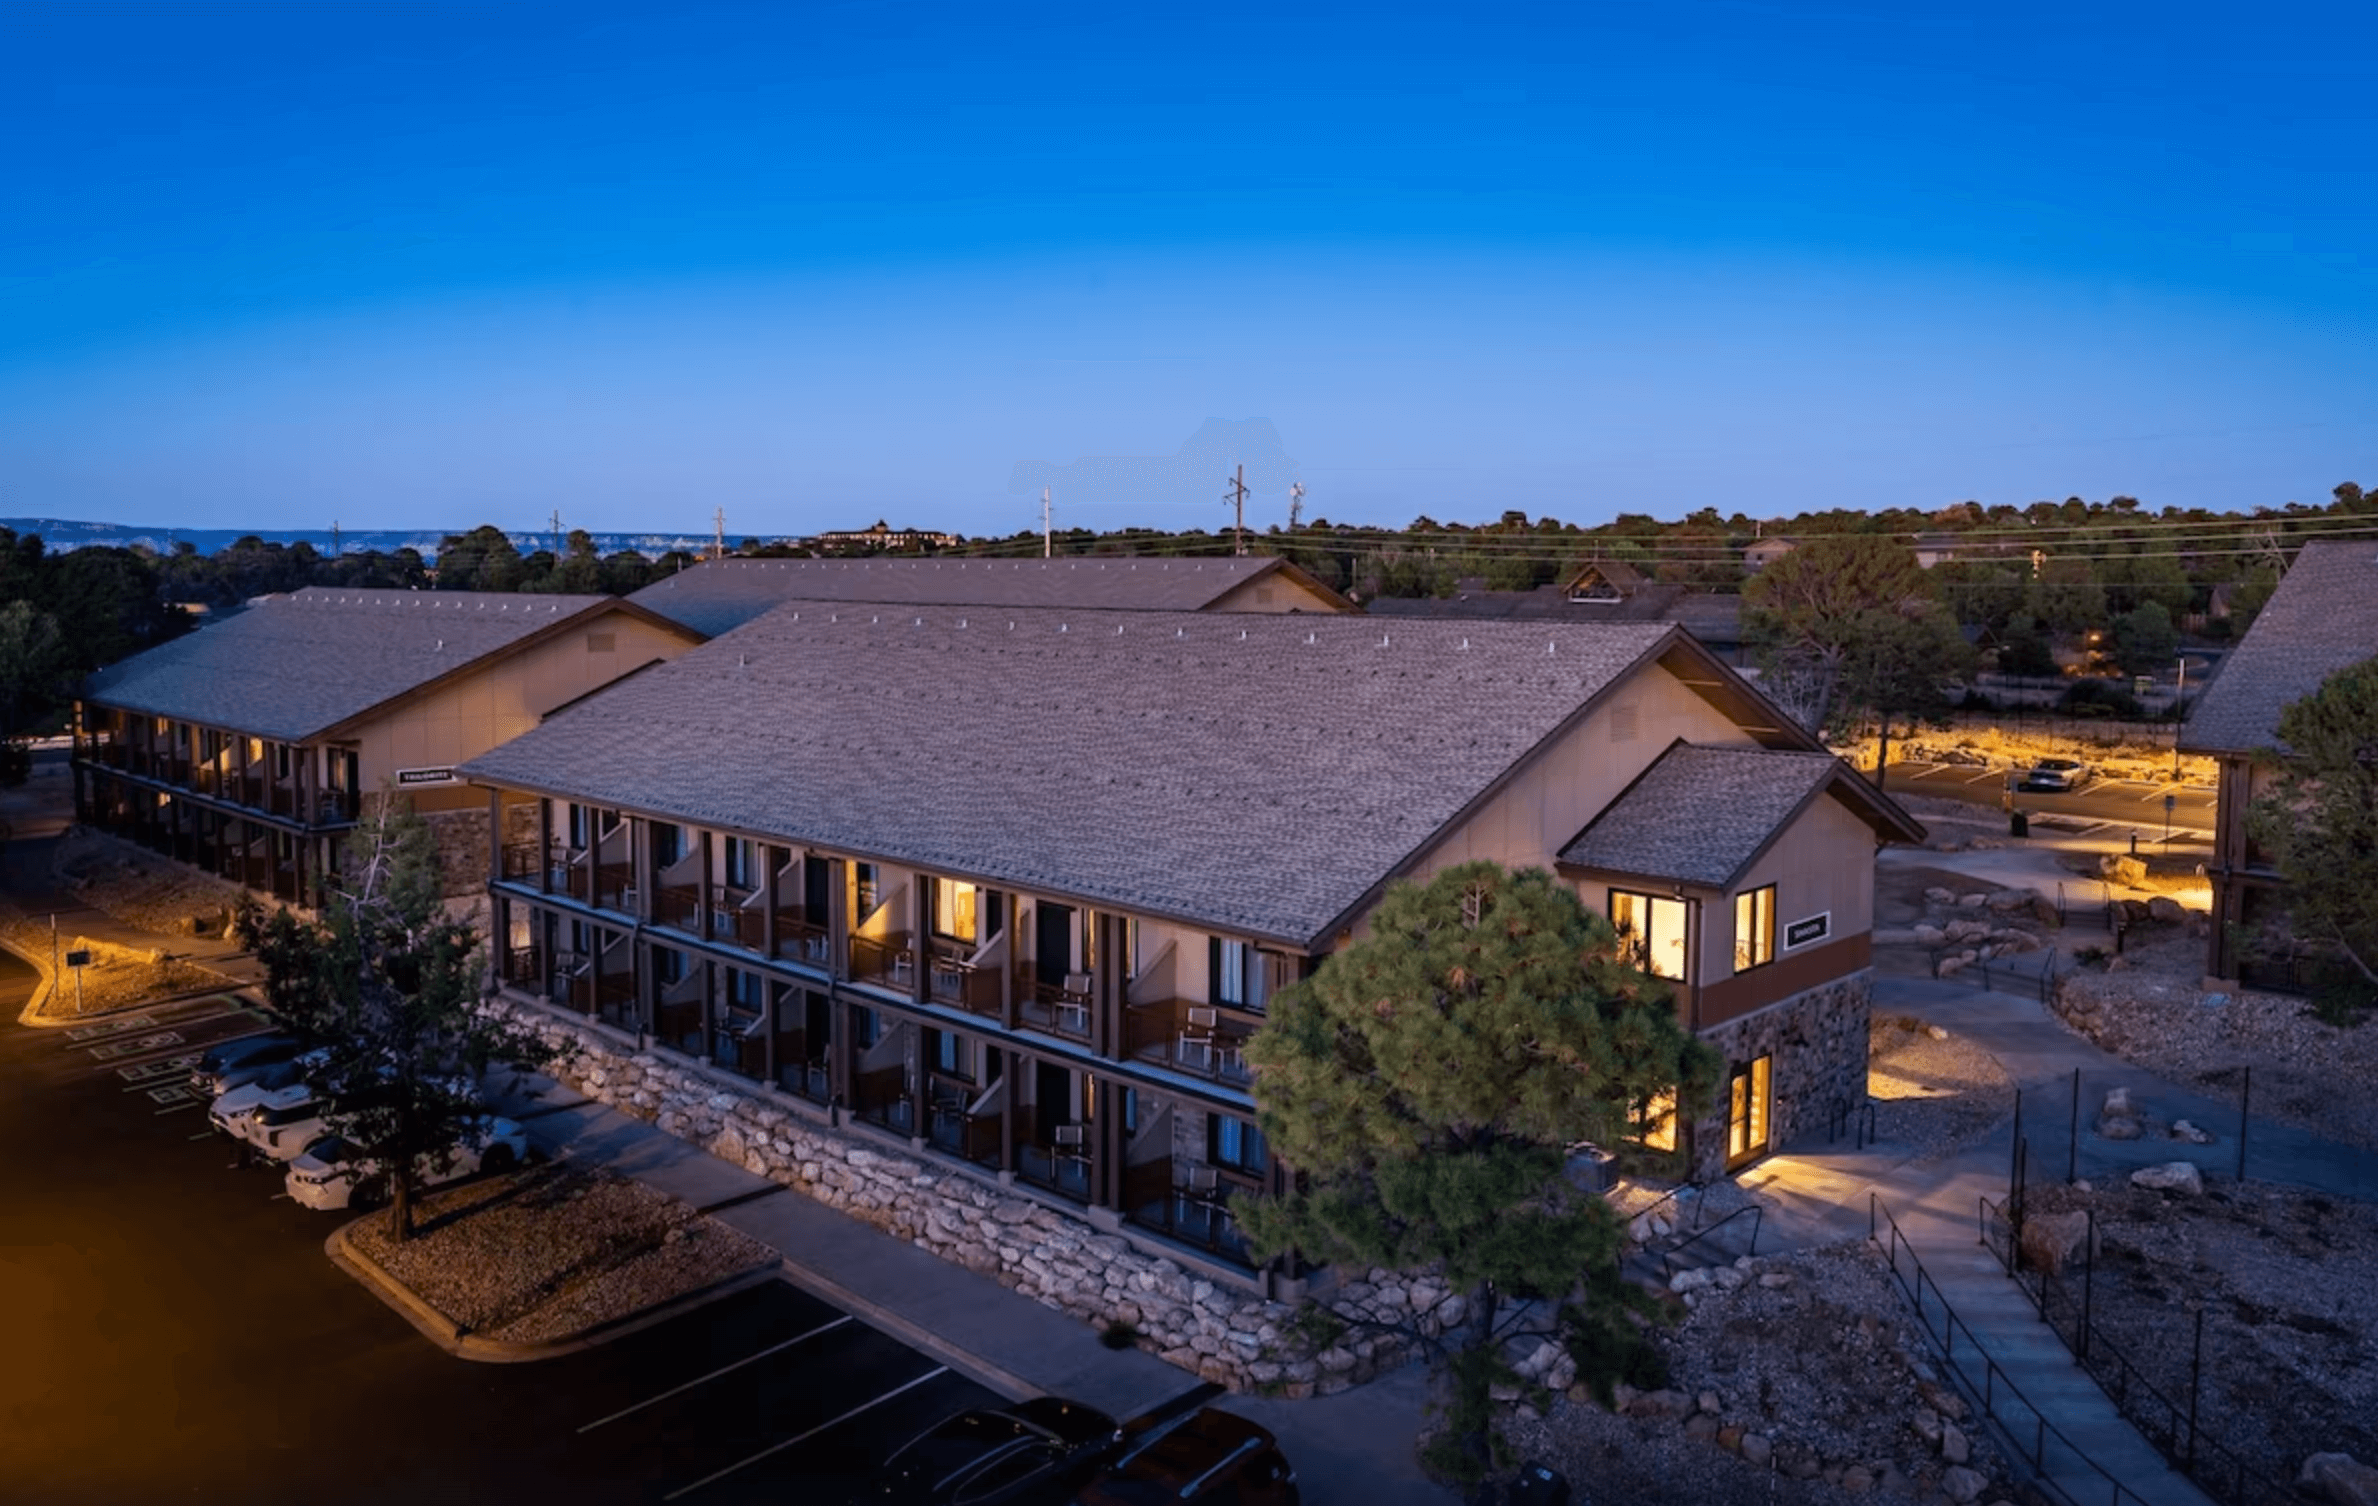 Where to stay near the Grand Canyon